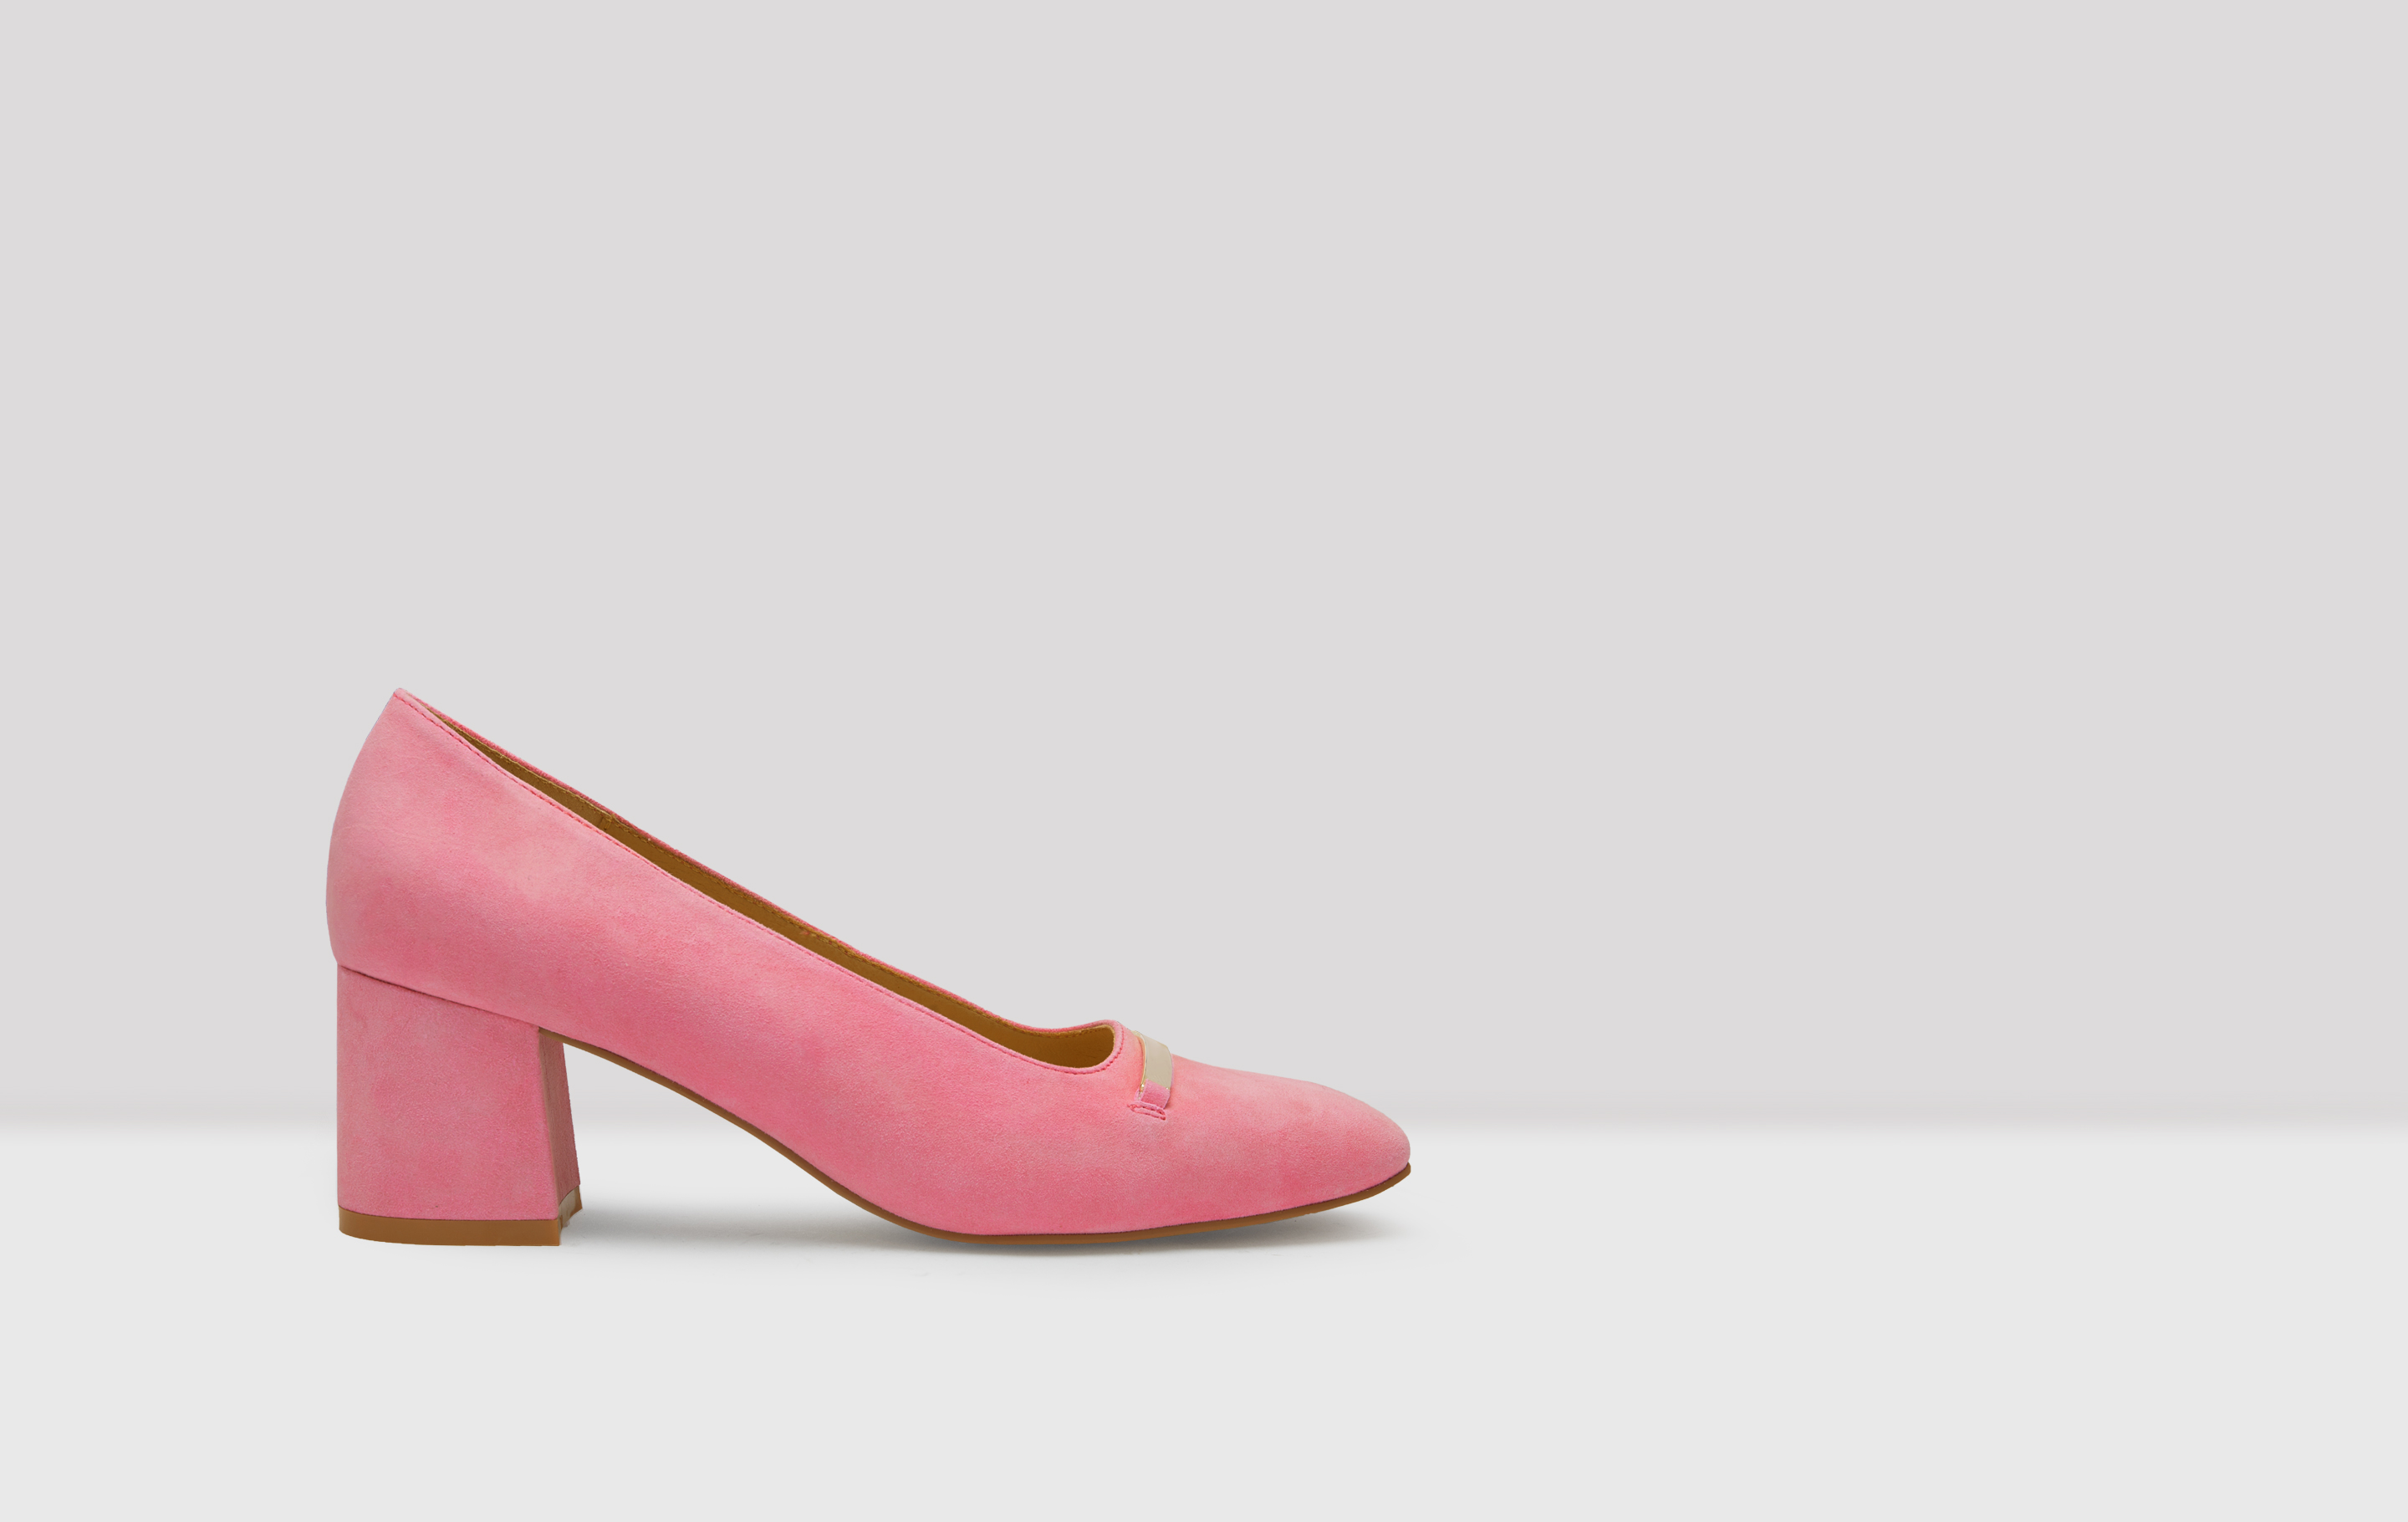 Daisy Rose Pink Suede Heels // E8 by 